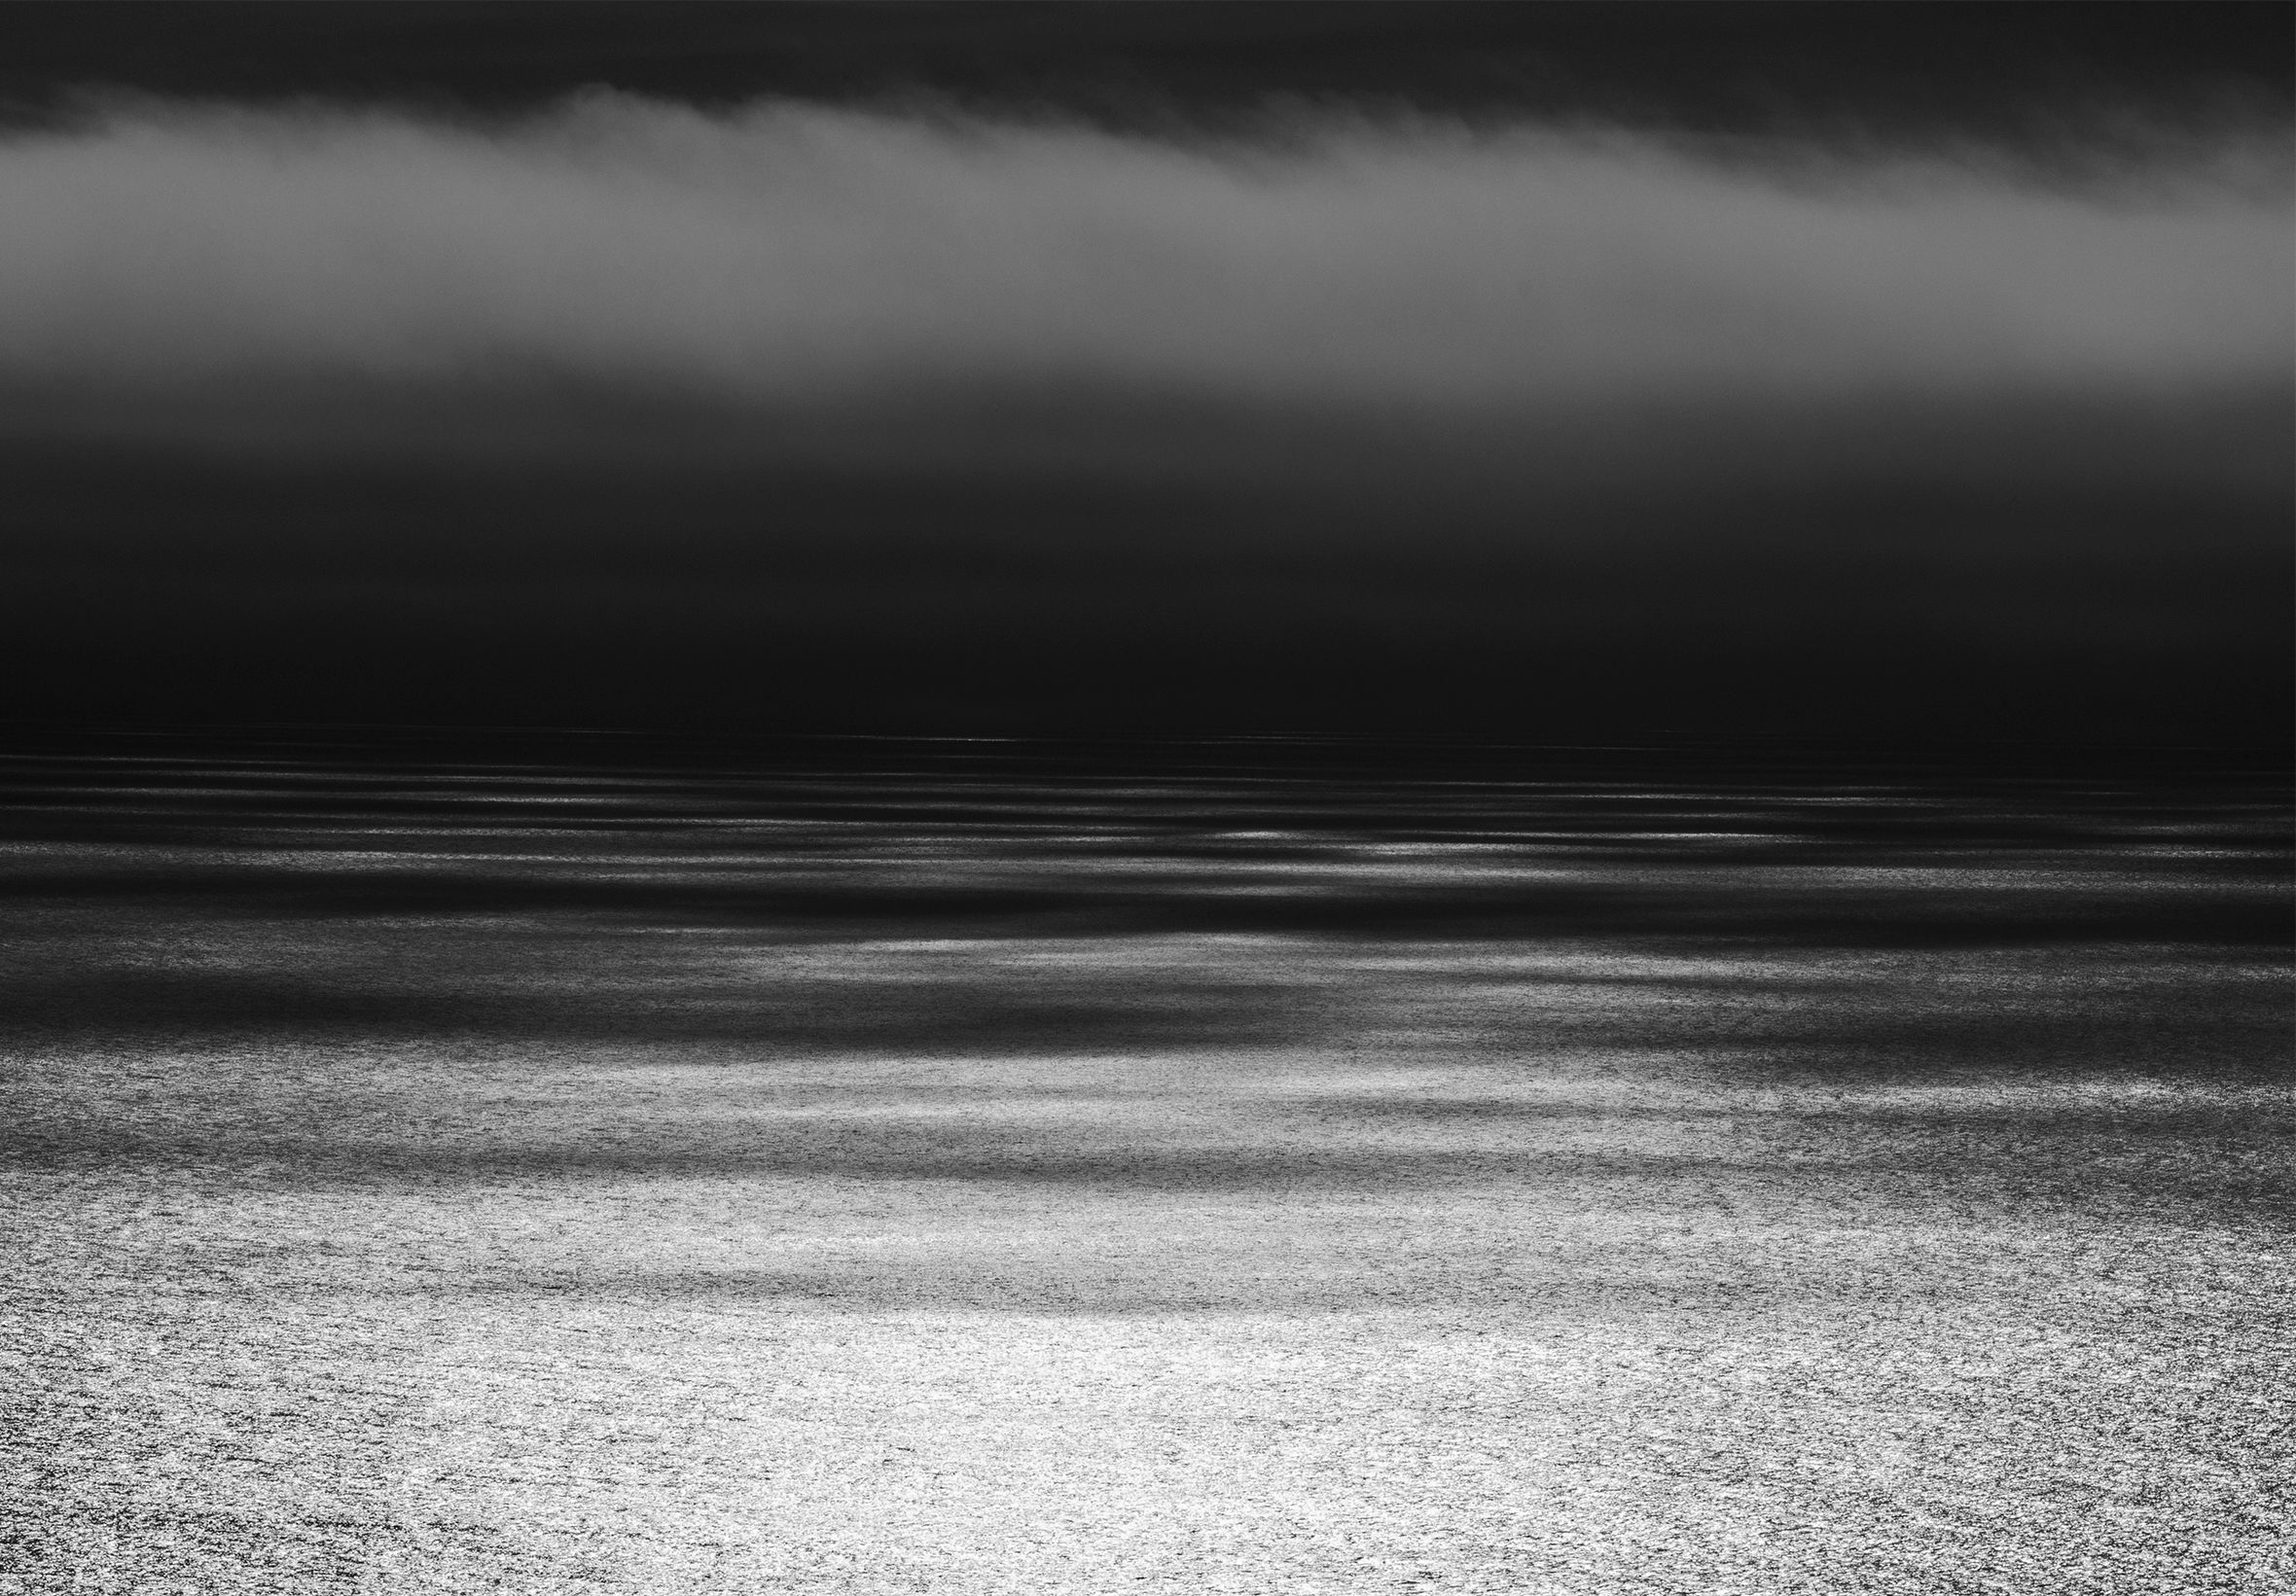 View from the beach of the water to the horizon with dark clouds peeking down from along the top edge of the image. The image is dark with light rippling on the water.